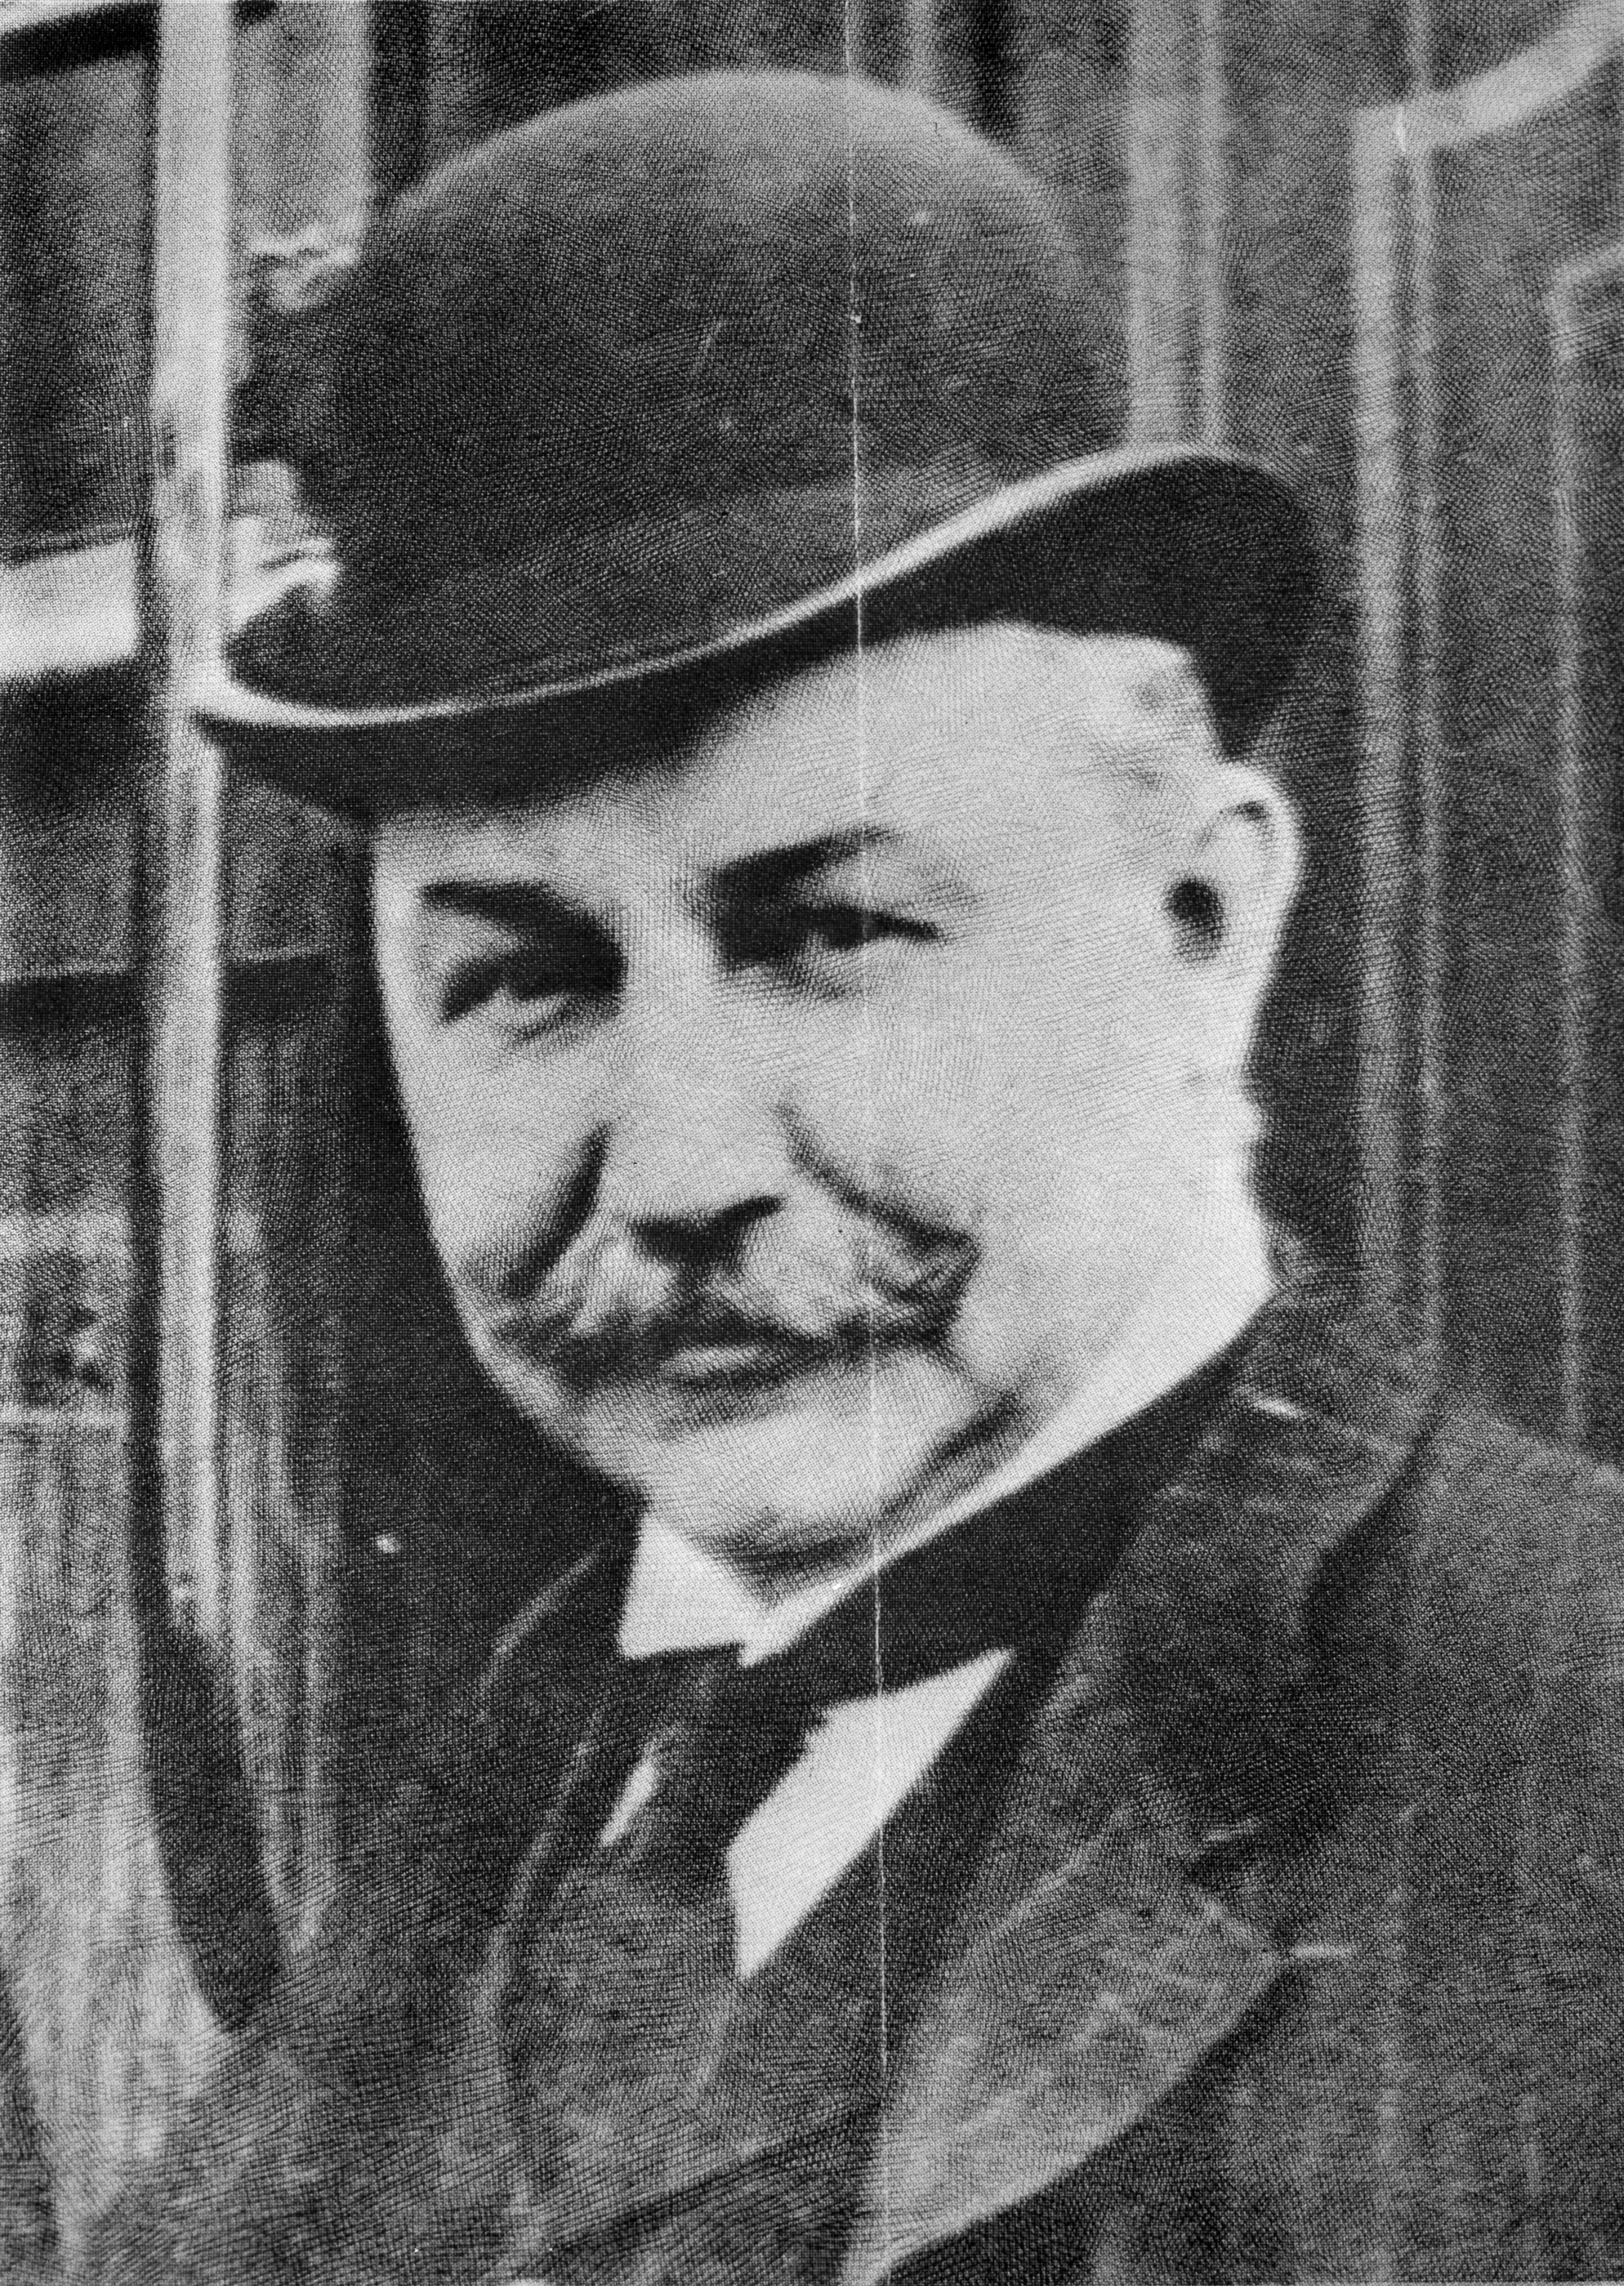 A black and white photo of a man in a suit. He wears a mustache and a bowler hat.